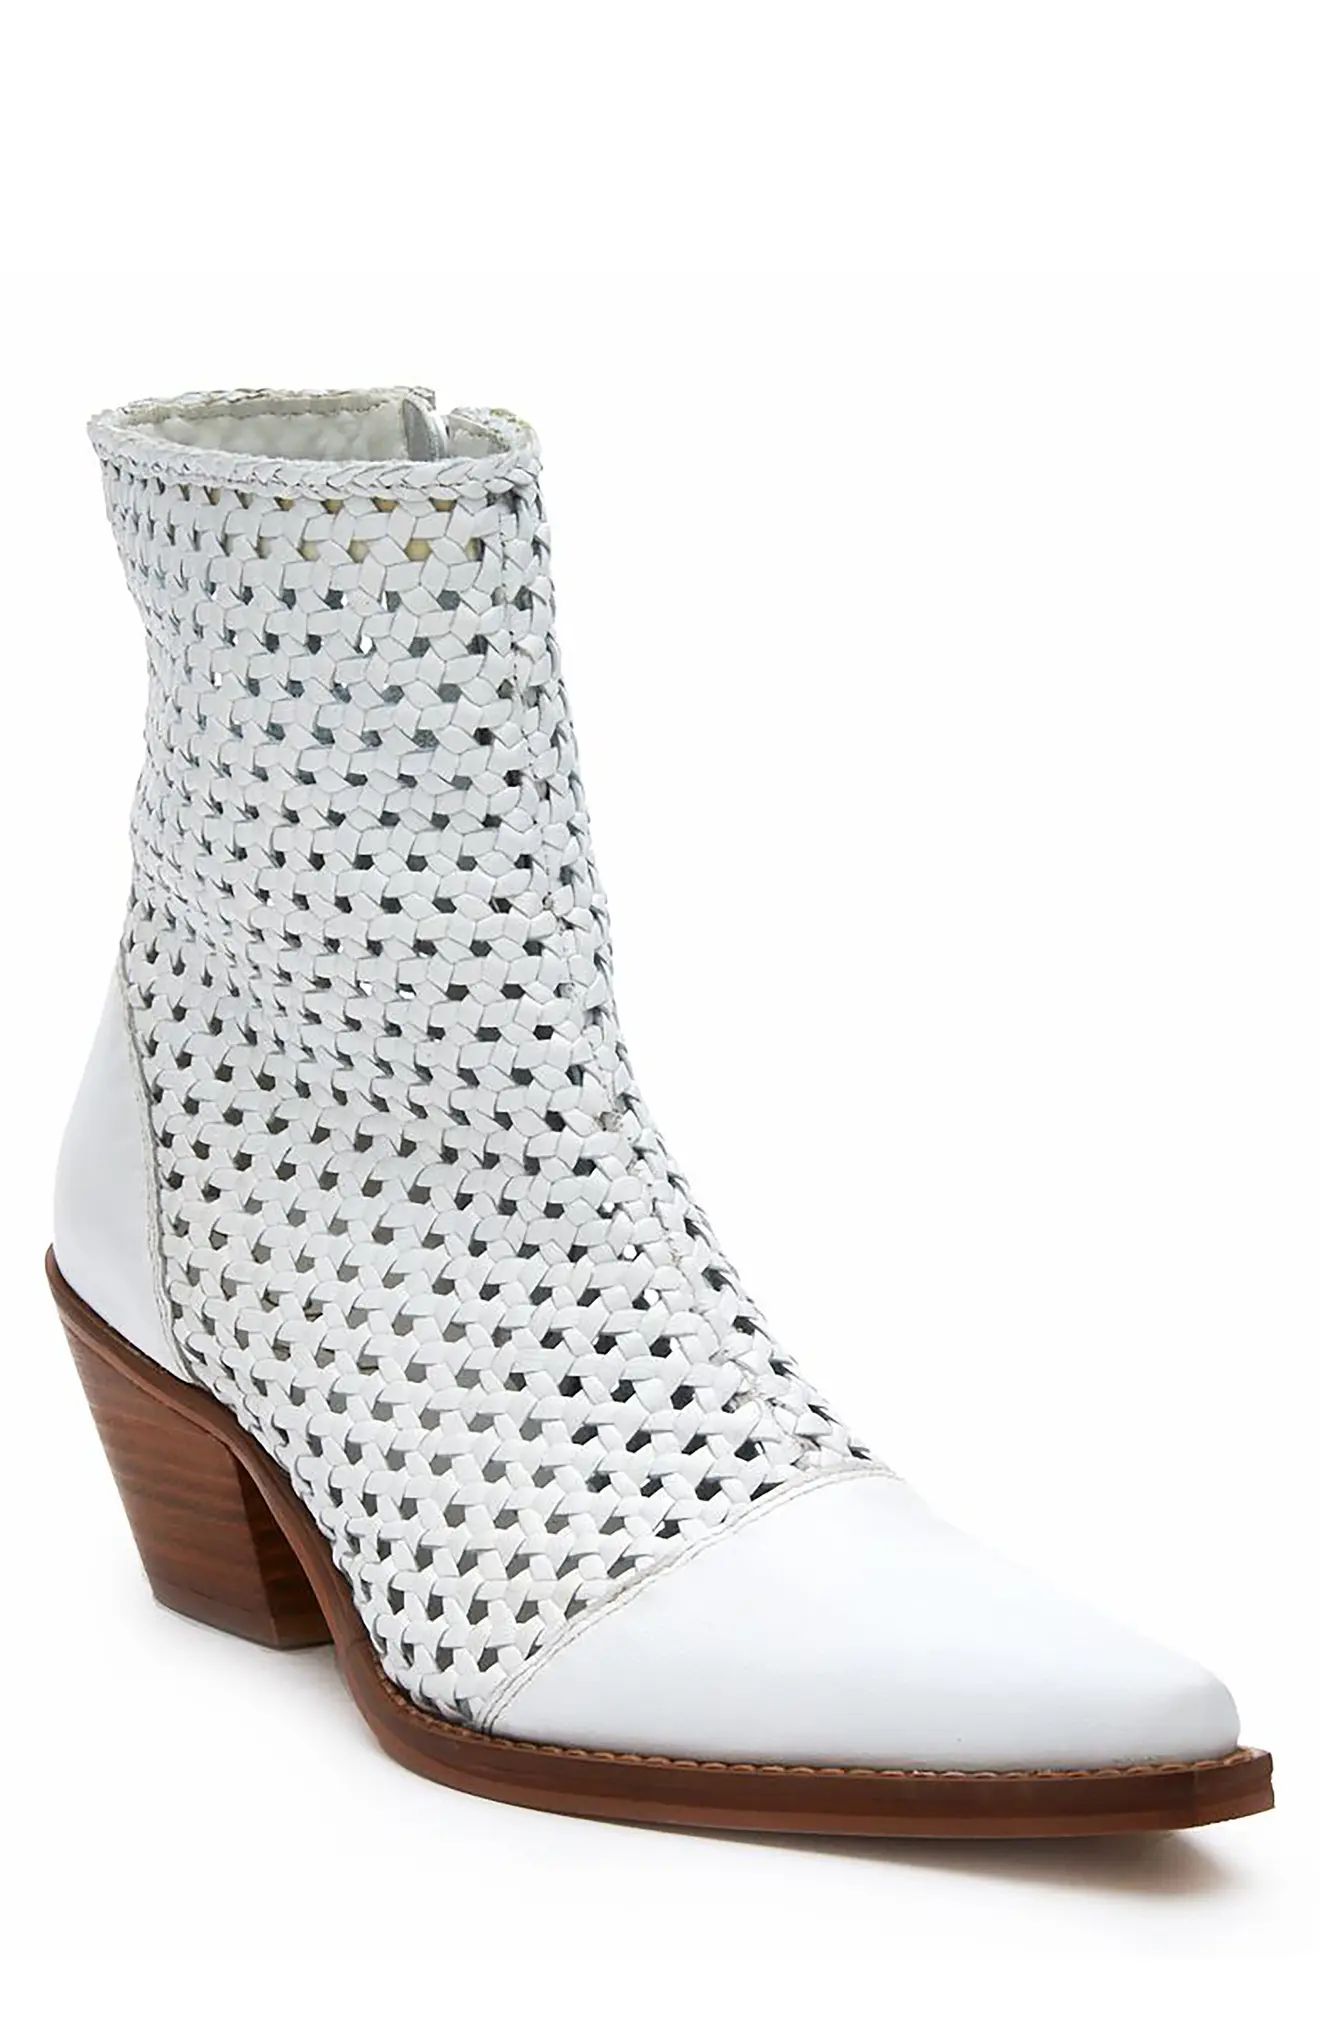 Coconuts by Matisse Golden Hour Western Boot in White at Nordstrom, Size 8.5 | Nordstrom